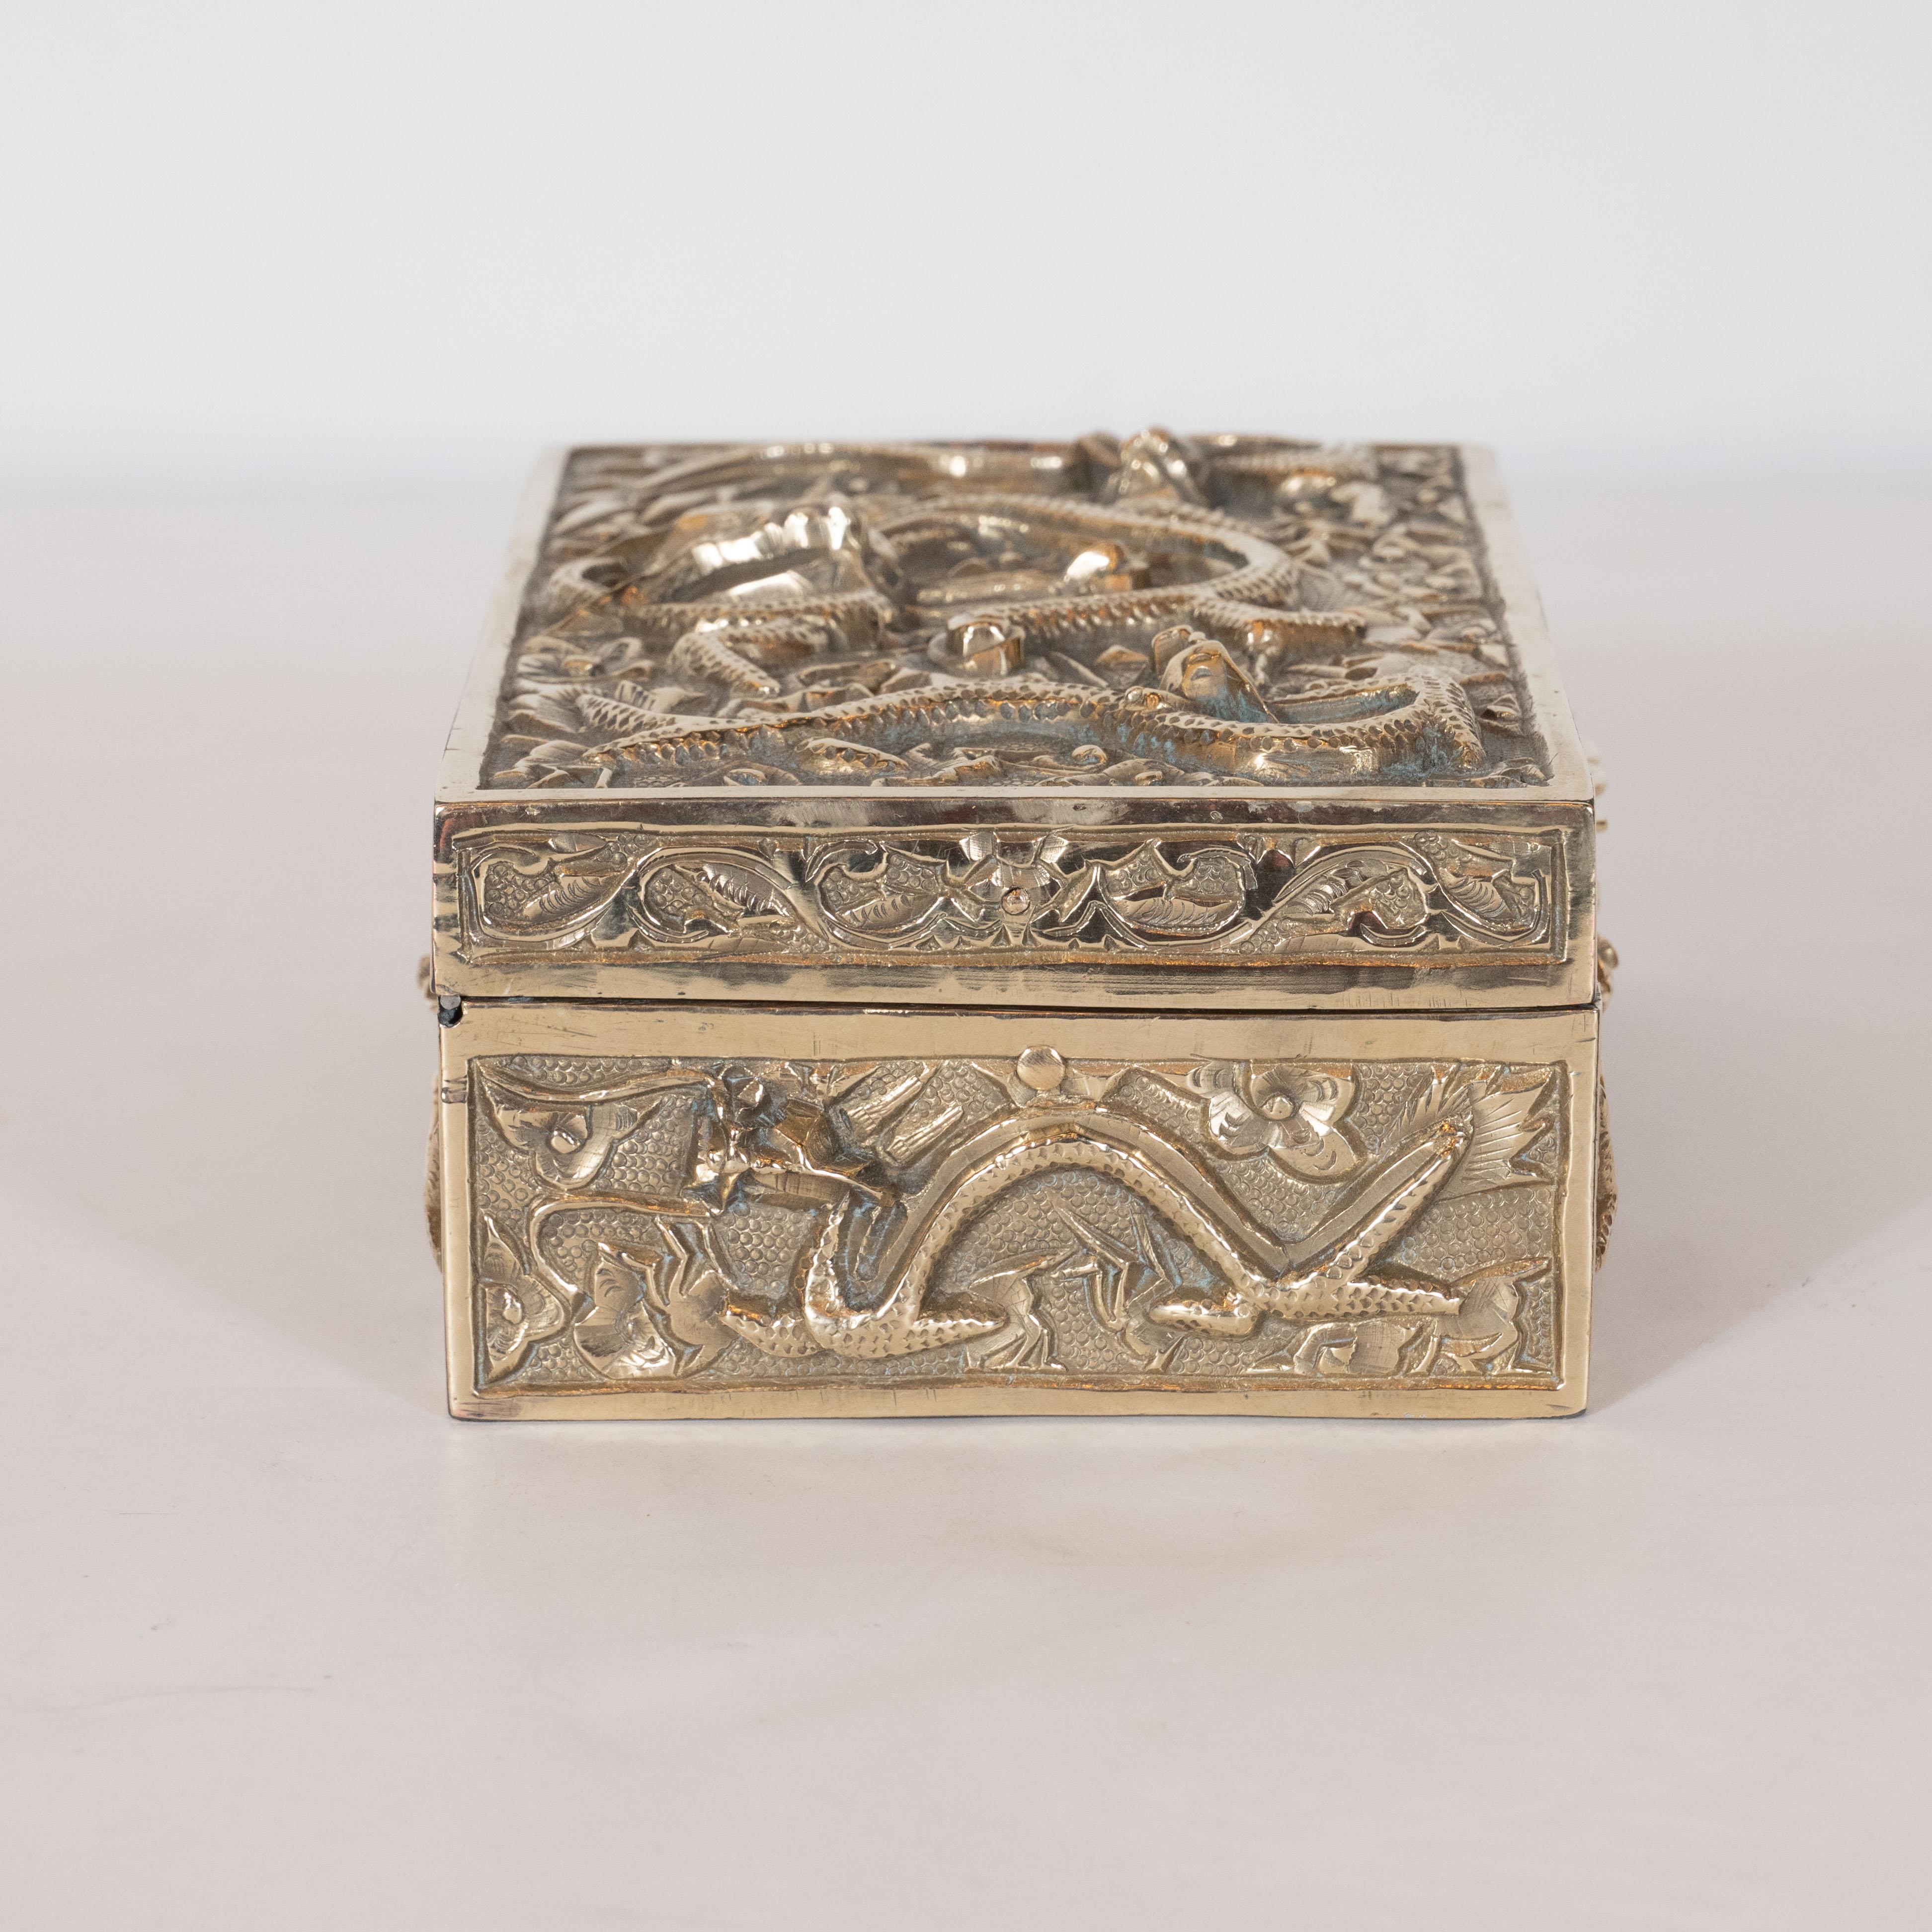 Mid-20th Century Art Deco Brass Rectangular Decorative Box with Dragon Motif in High Relief